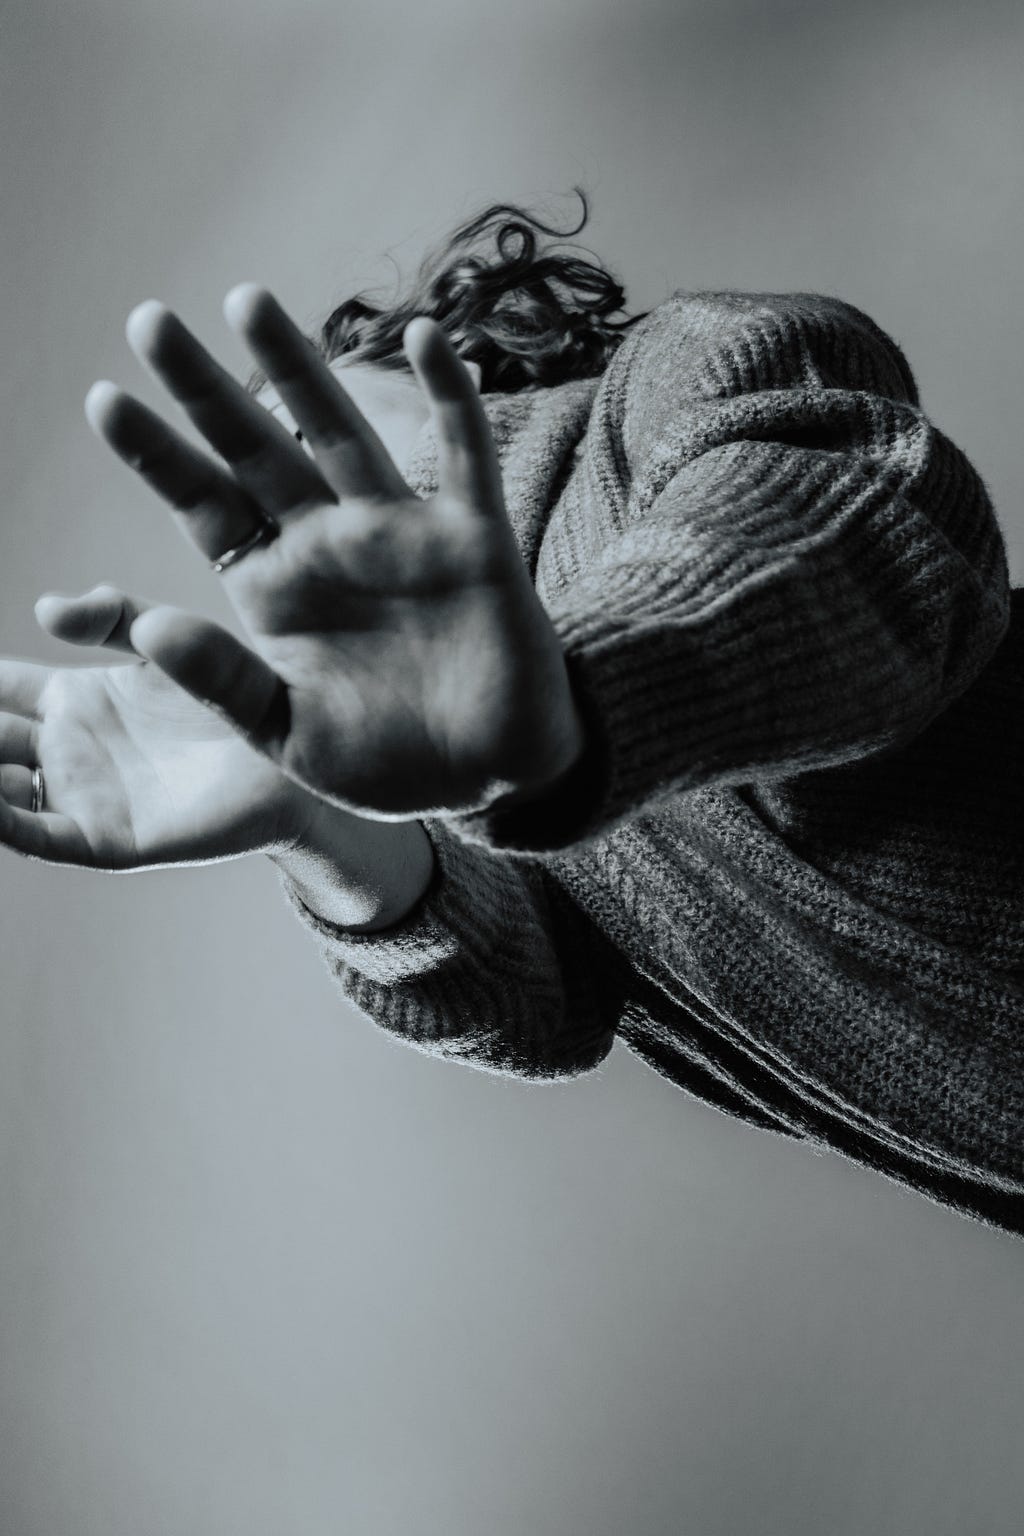 Black and white image taken from below of a woman extending her arms toward the camera with her hands outstretched as if she is pushing the camera away.